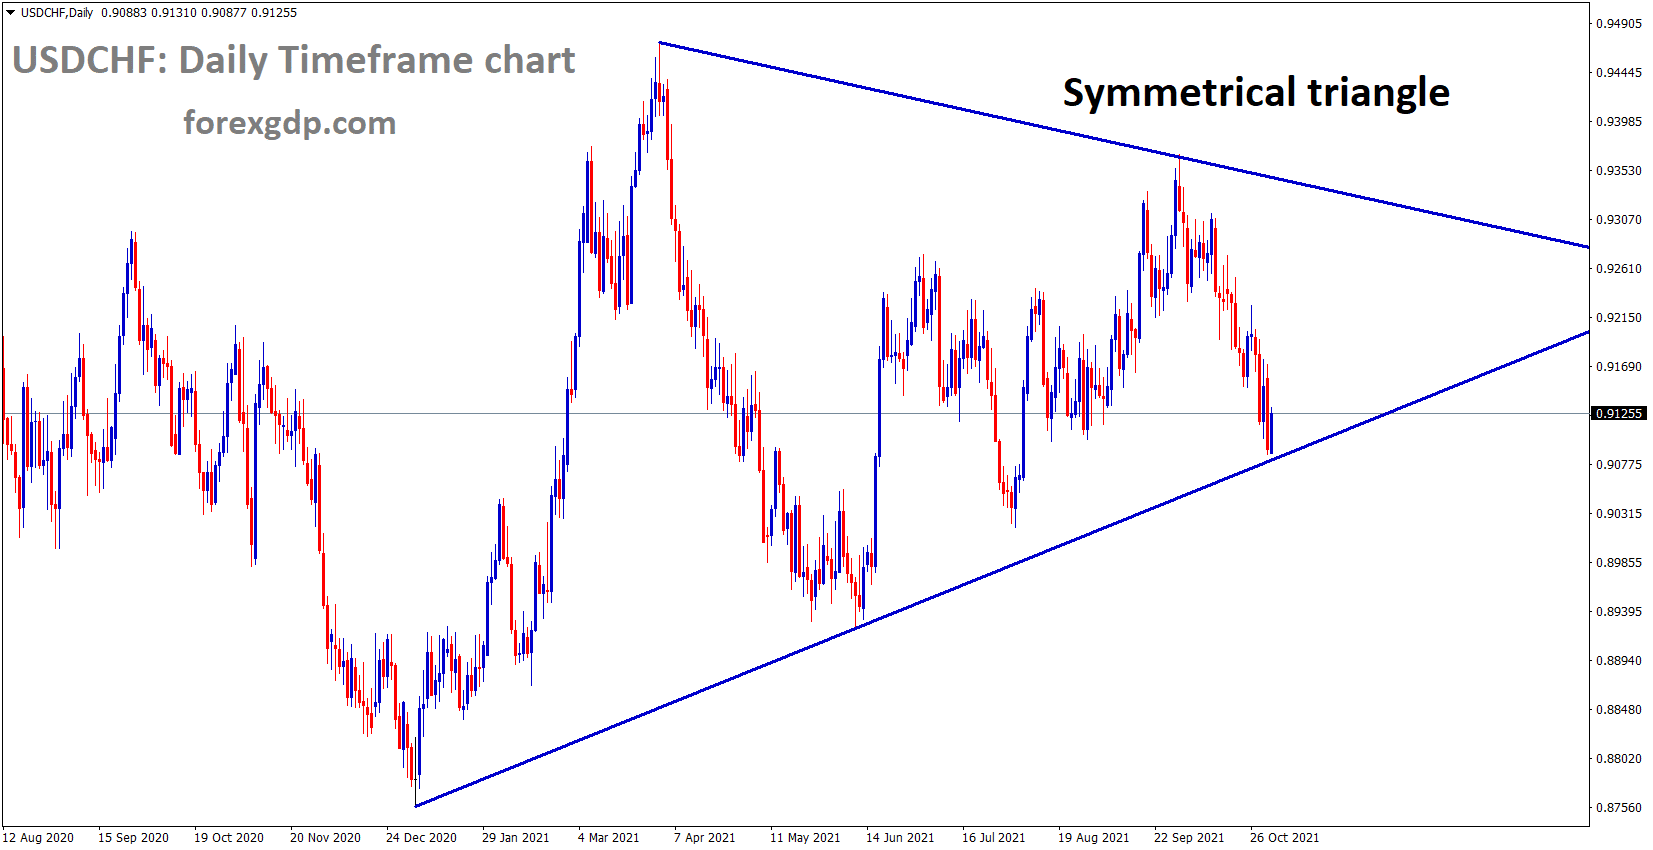 USDCHF is moving in the Symmetrical triangle pattern 1